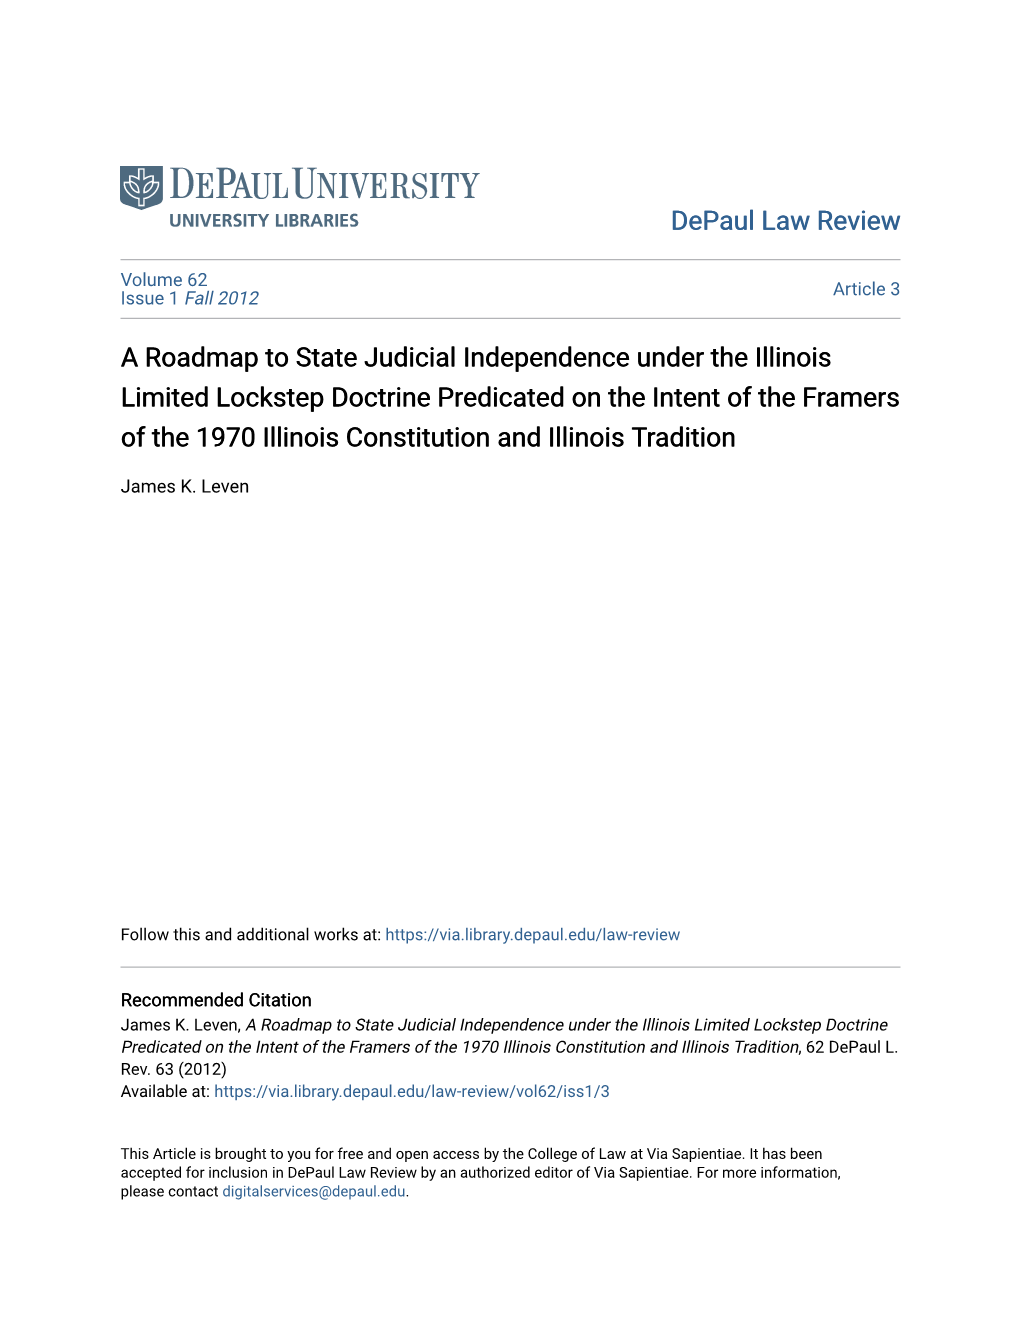 A Roadmap to State Judicial Independence Under the Illinois Limited Lockstep Doctrine Predicated on the Intent of the Framers Of